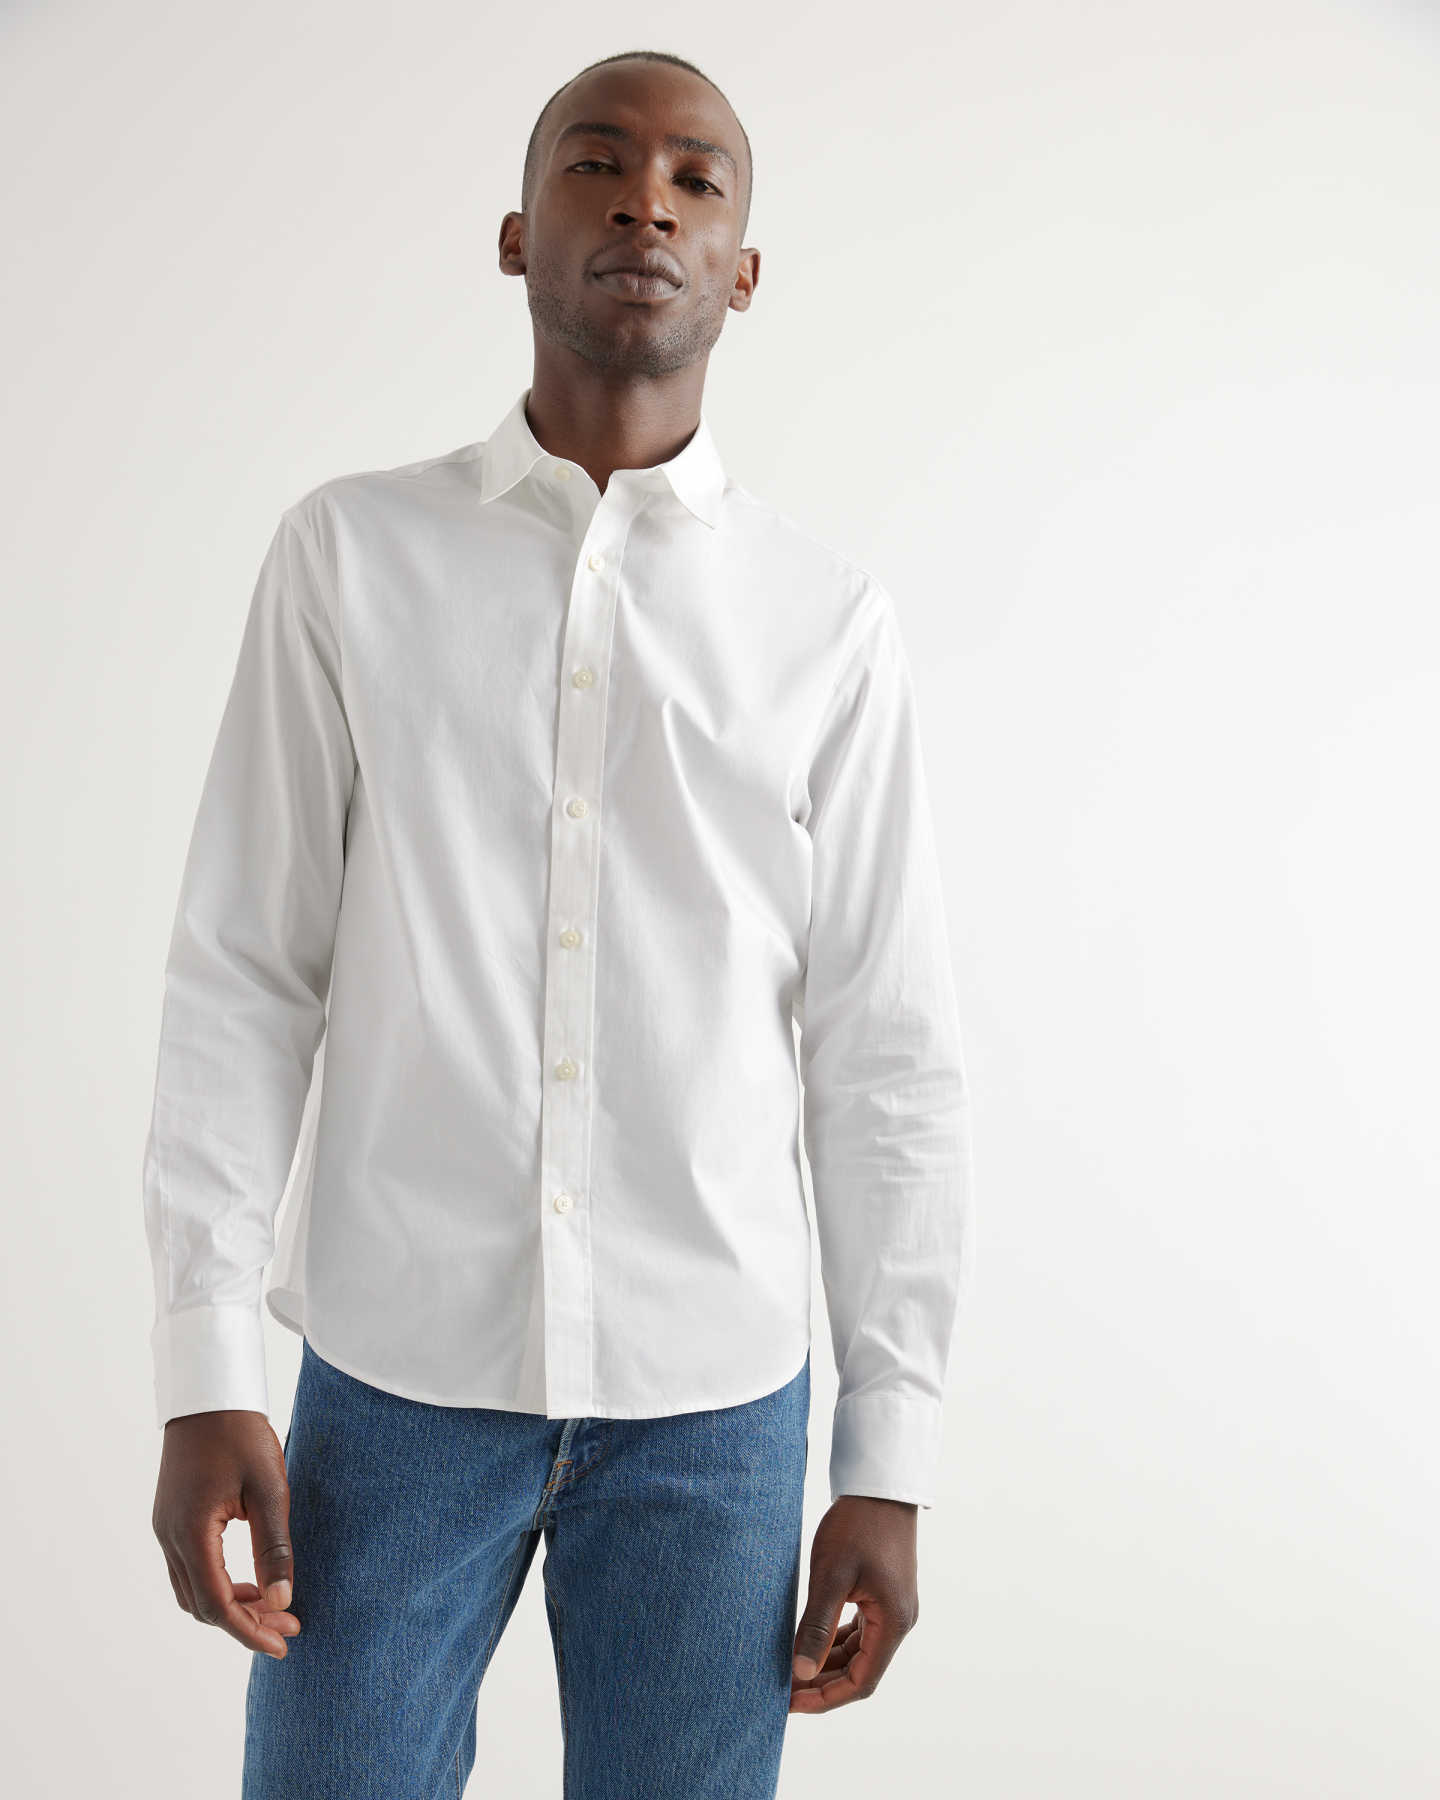 The Untucked Dress Shirt - Solid White